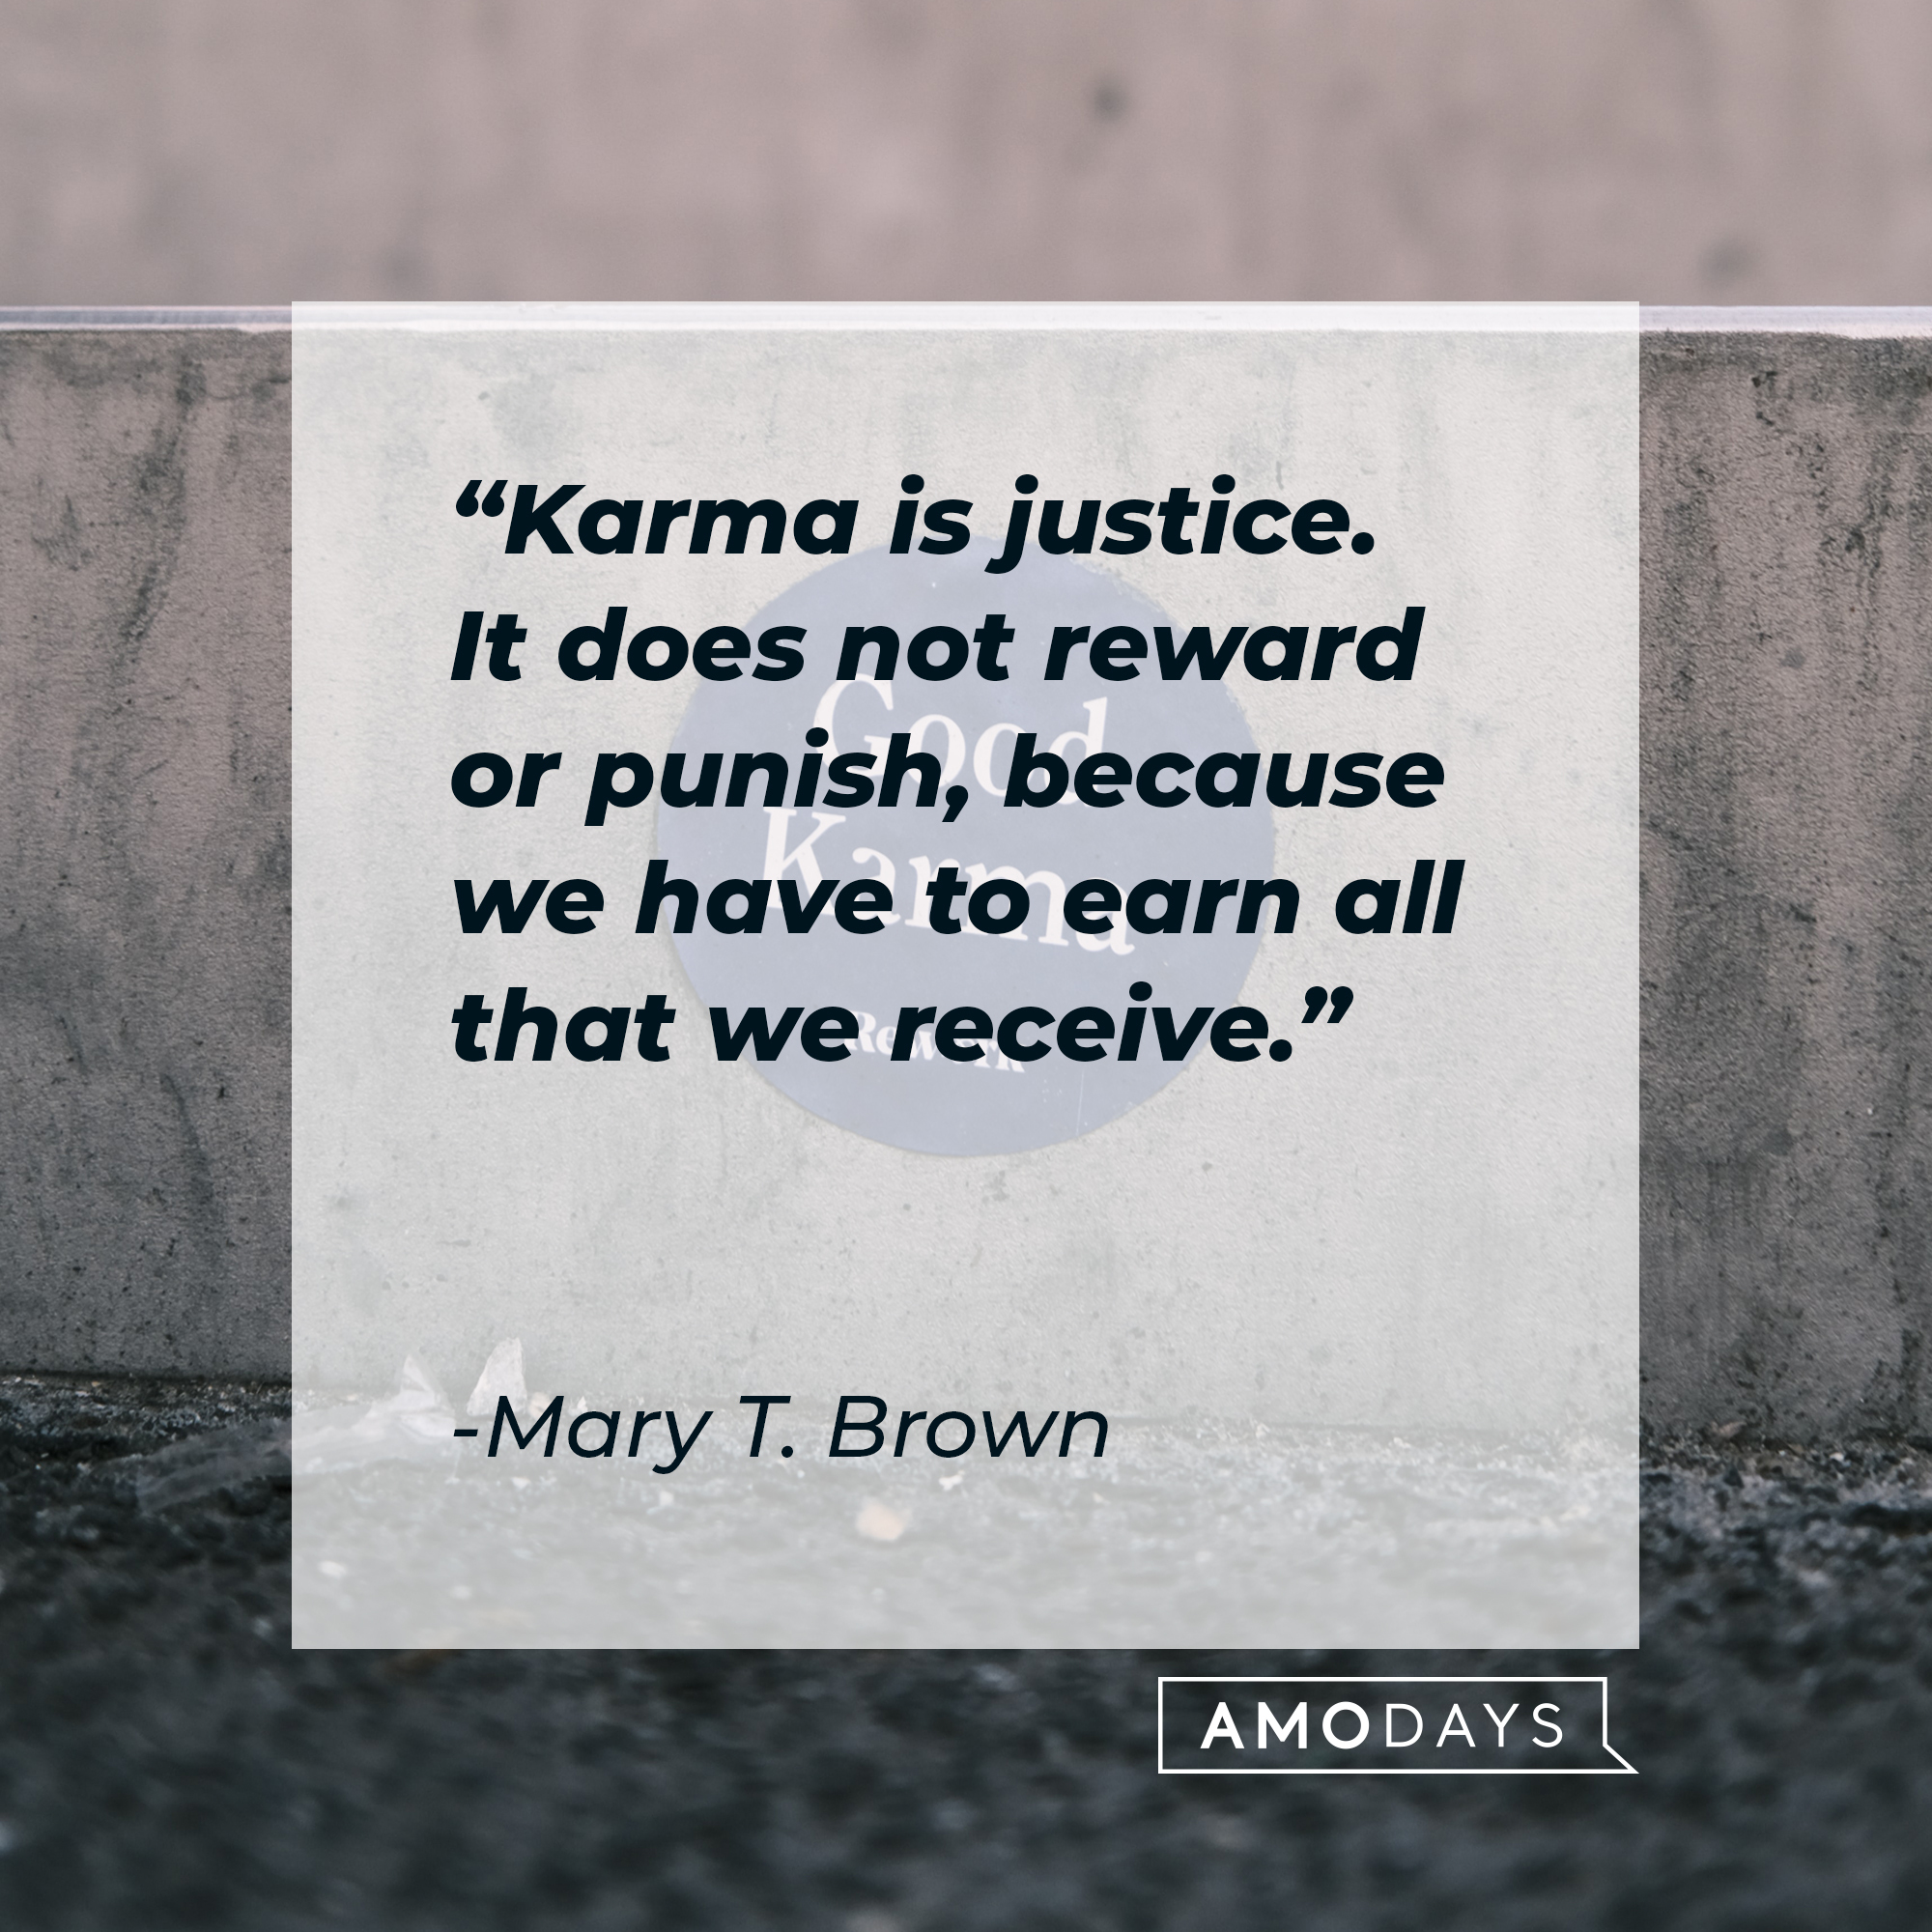 Mary T. Brown's quote: "Karma is justice. It does not reward or punish, because we have to earn all that we receive." | Image: AmoDays